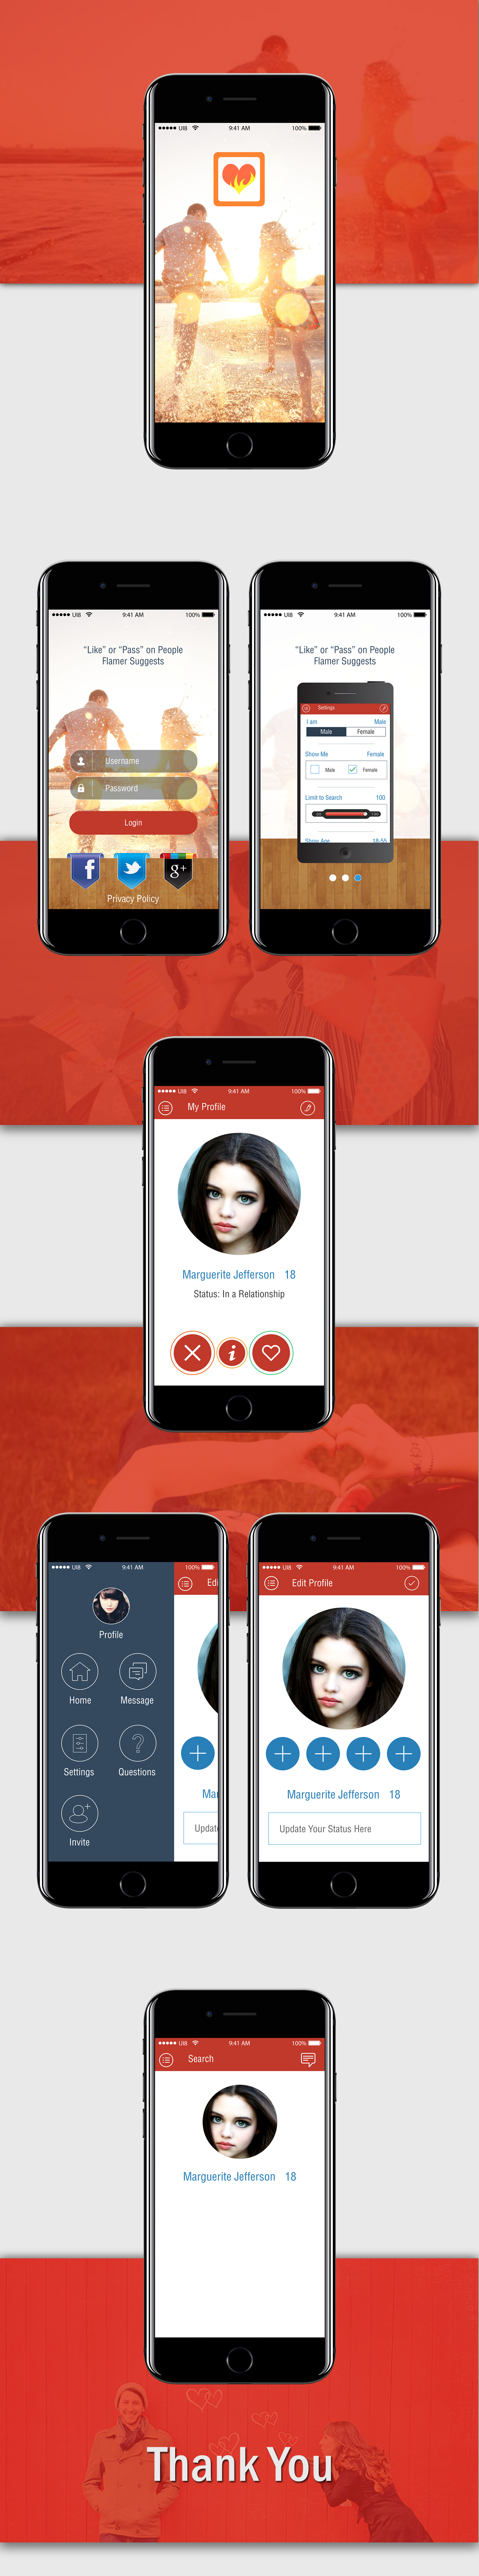 android ios UI design ux mobile application messaging